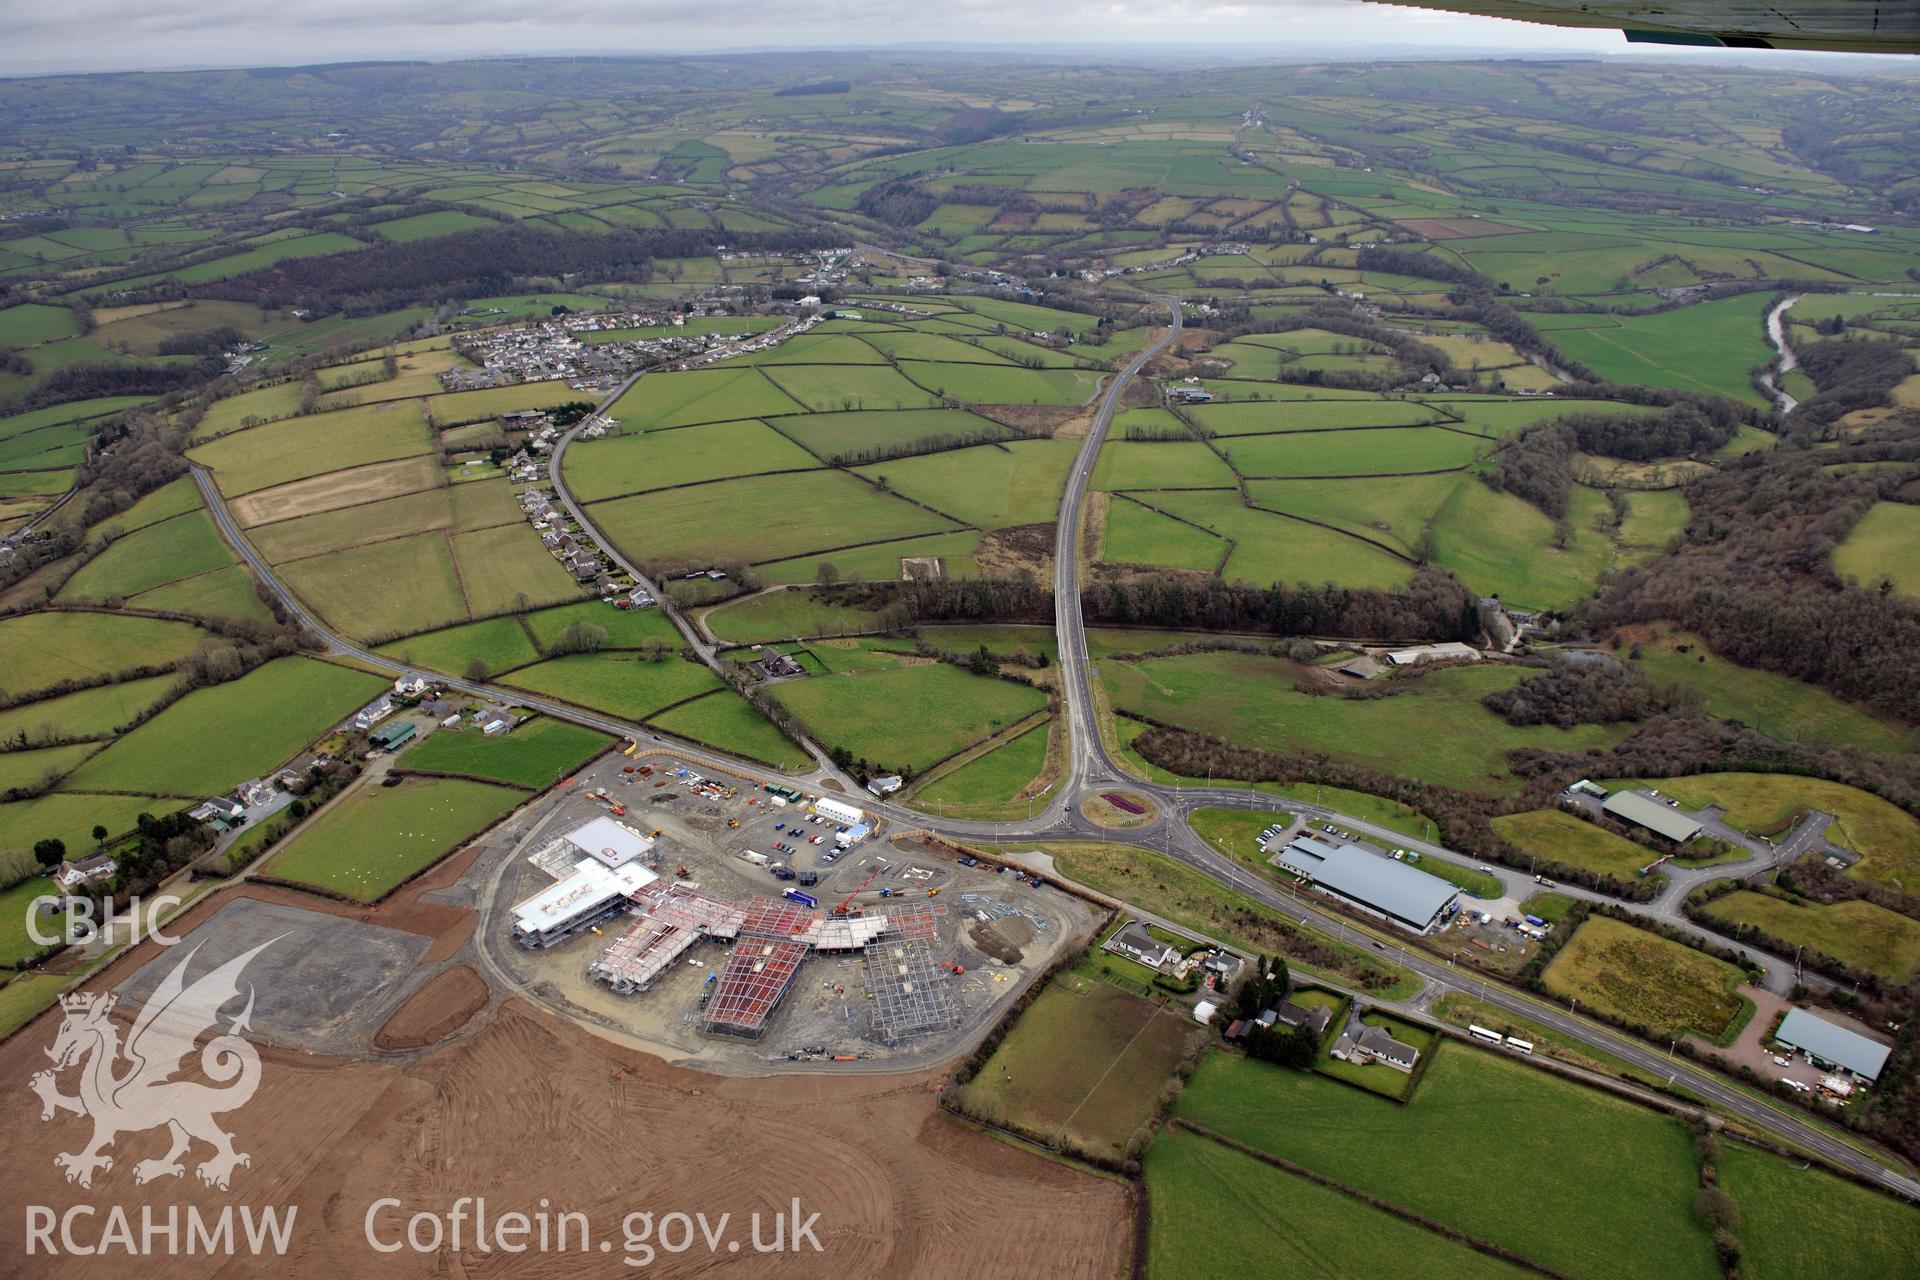 Ysgol Bro Teifi under construction, the A486 Llandysul bypass, and the town of Llandysul beyond. Oblique aerial photograph taken during the Royal Commission's programme of archaeological aerial reconnaissance by Toby Driver on 13th March 2015.